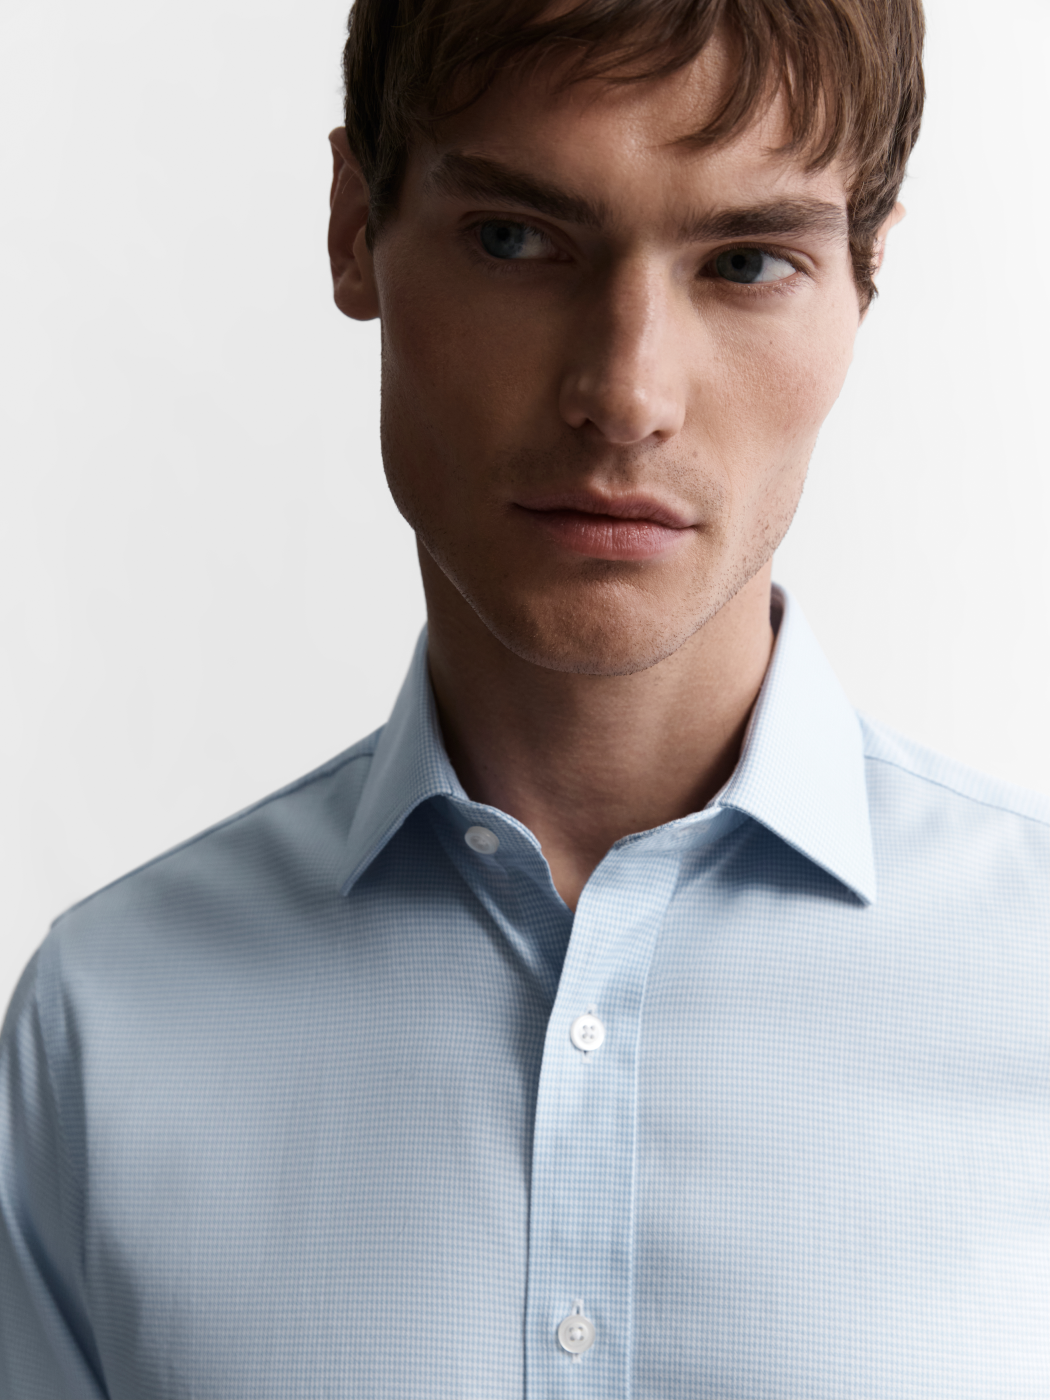 Image 3 of Non-Iron Light Blue Dogtooth Twill Slim Fit Double Cuff Classic Collar Shirt